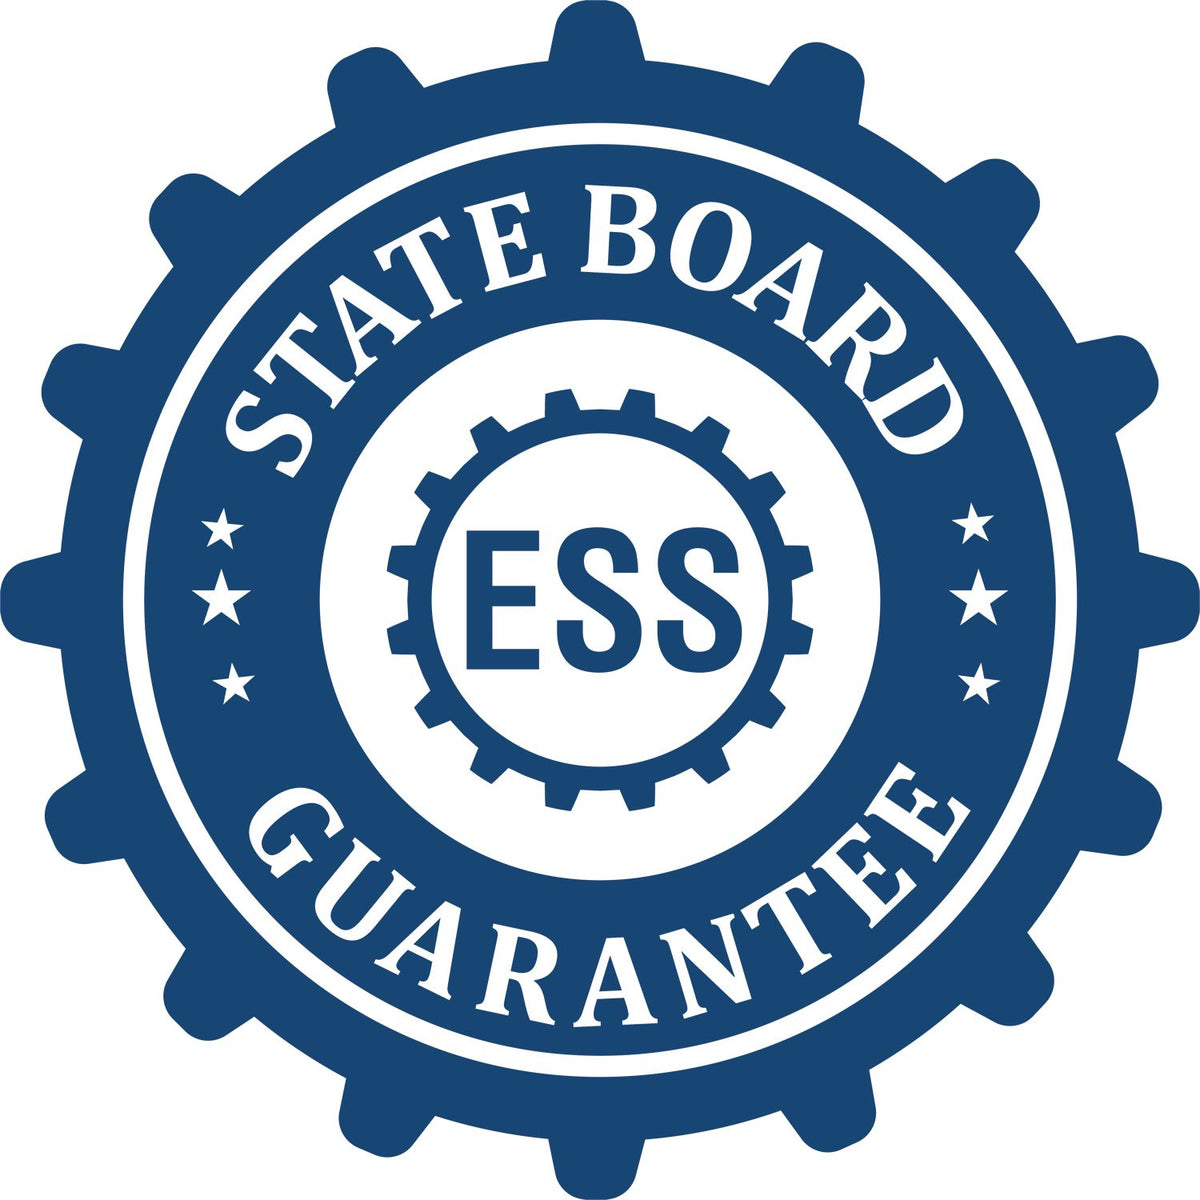 An emblem in a gear shape illustrating a state board guarantee for the Tennessee Geologist Desk Seal